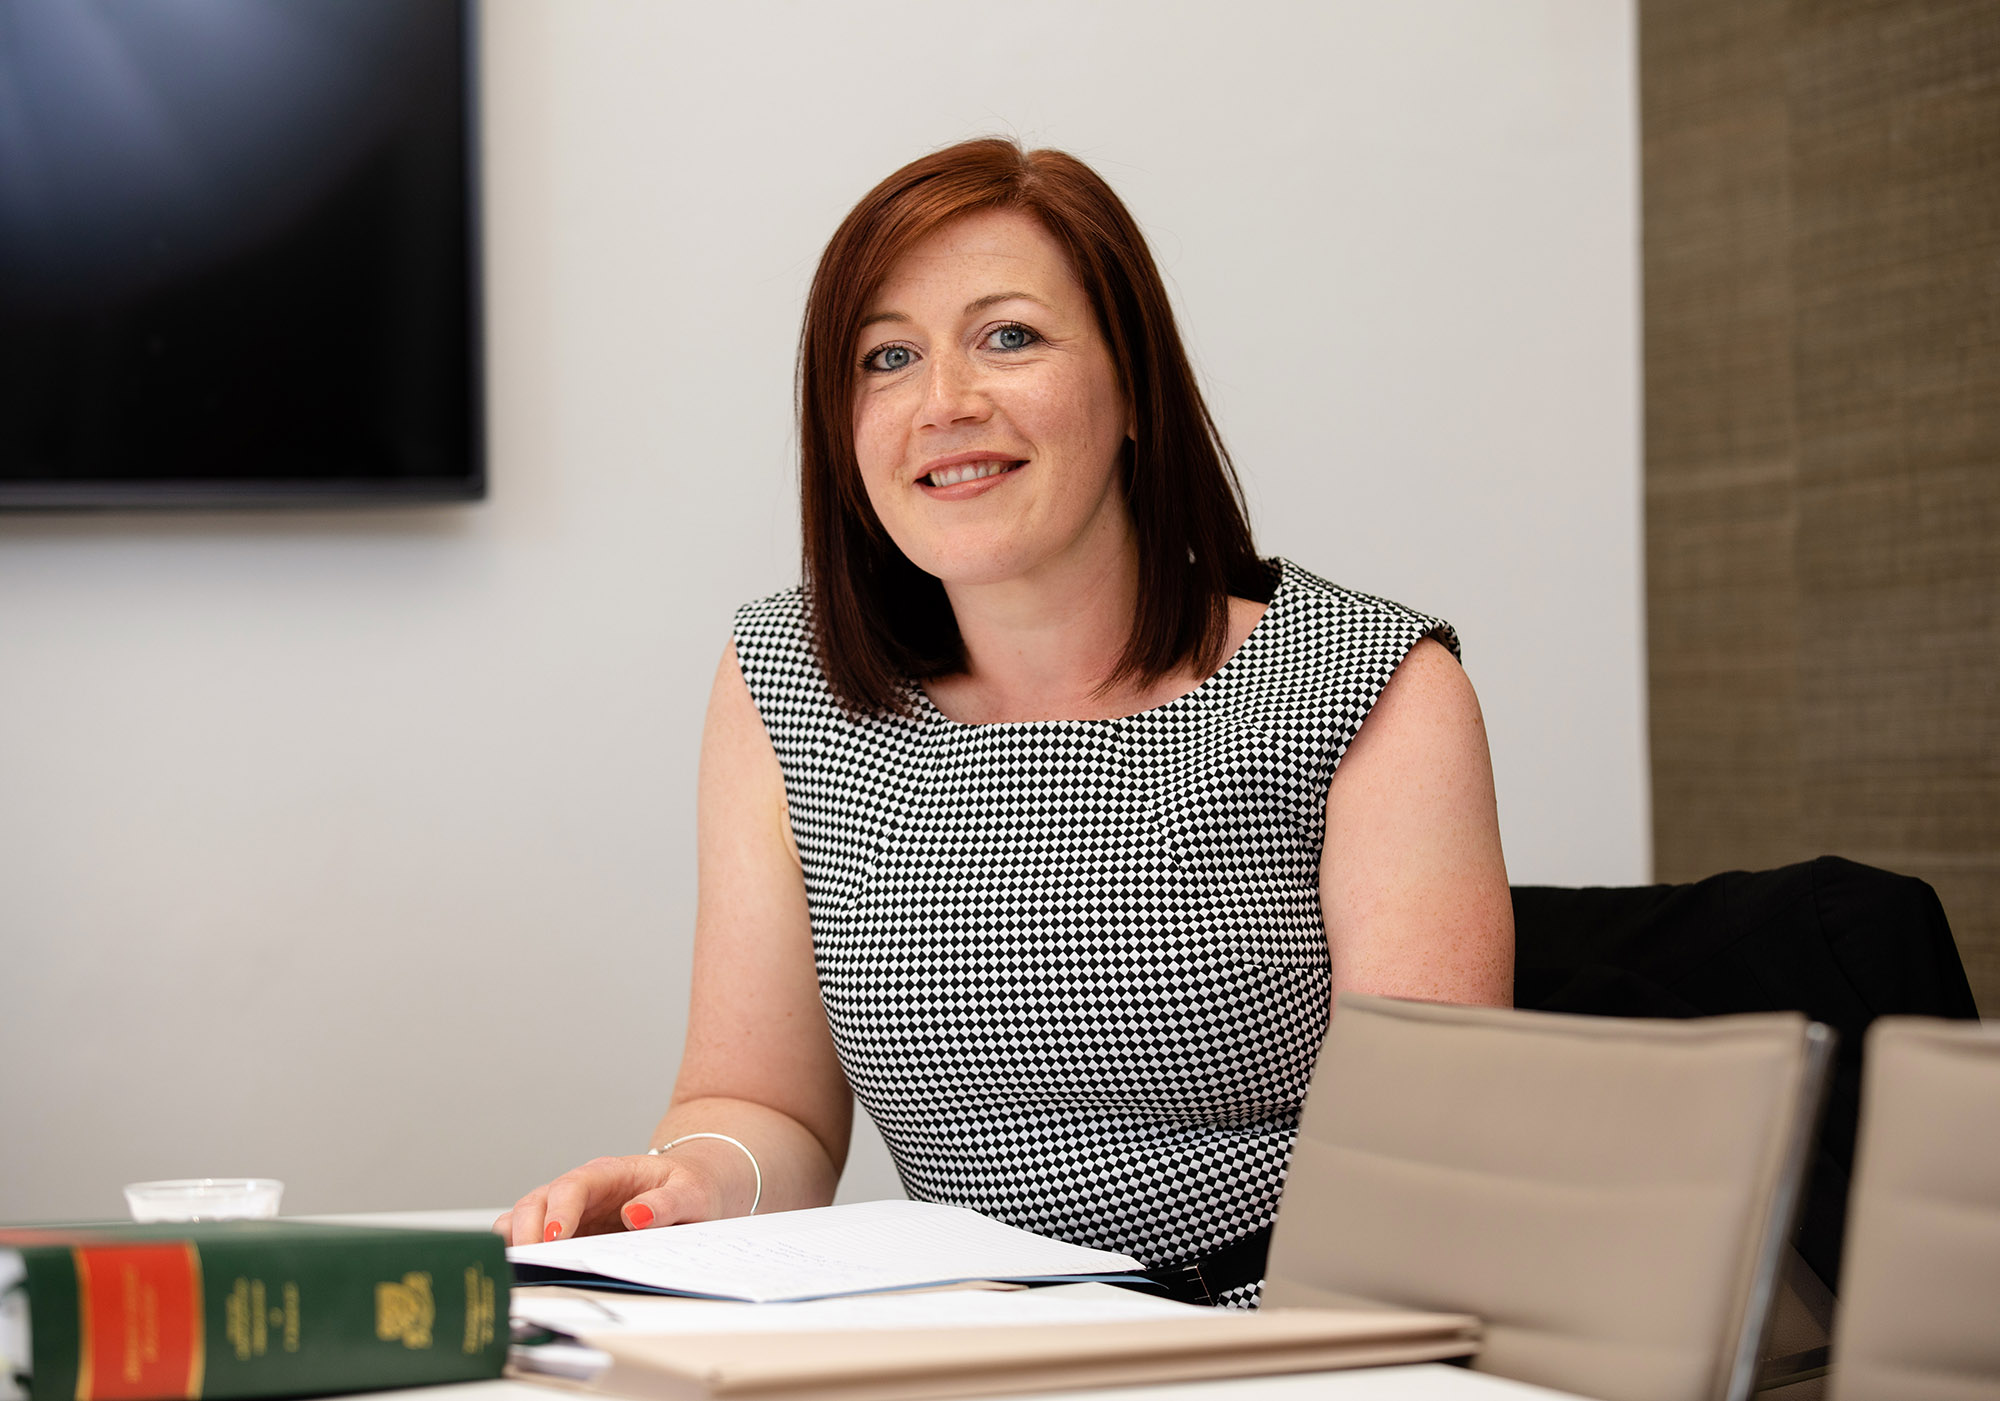 No Win, No Fee Personal Injury Compensation Claims Solicitors Scotland / Lyndsey Bell / Legal Director / Dispute Resolution / Friends Legal